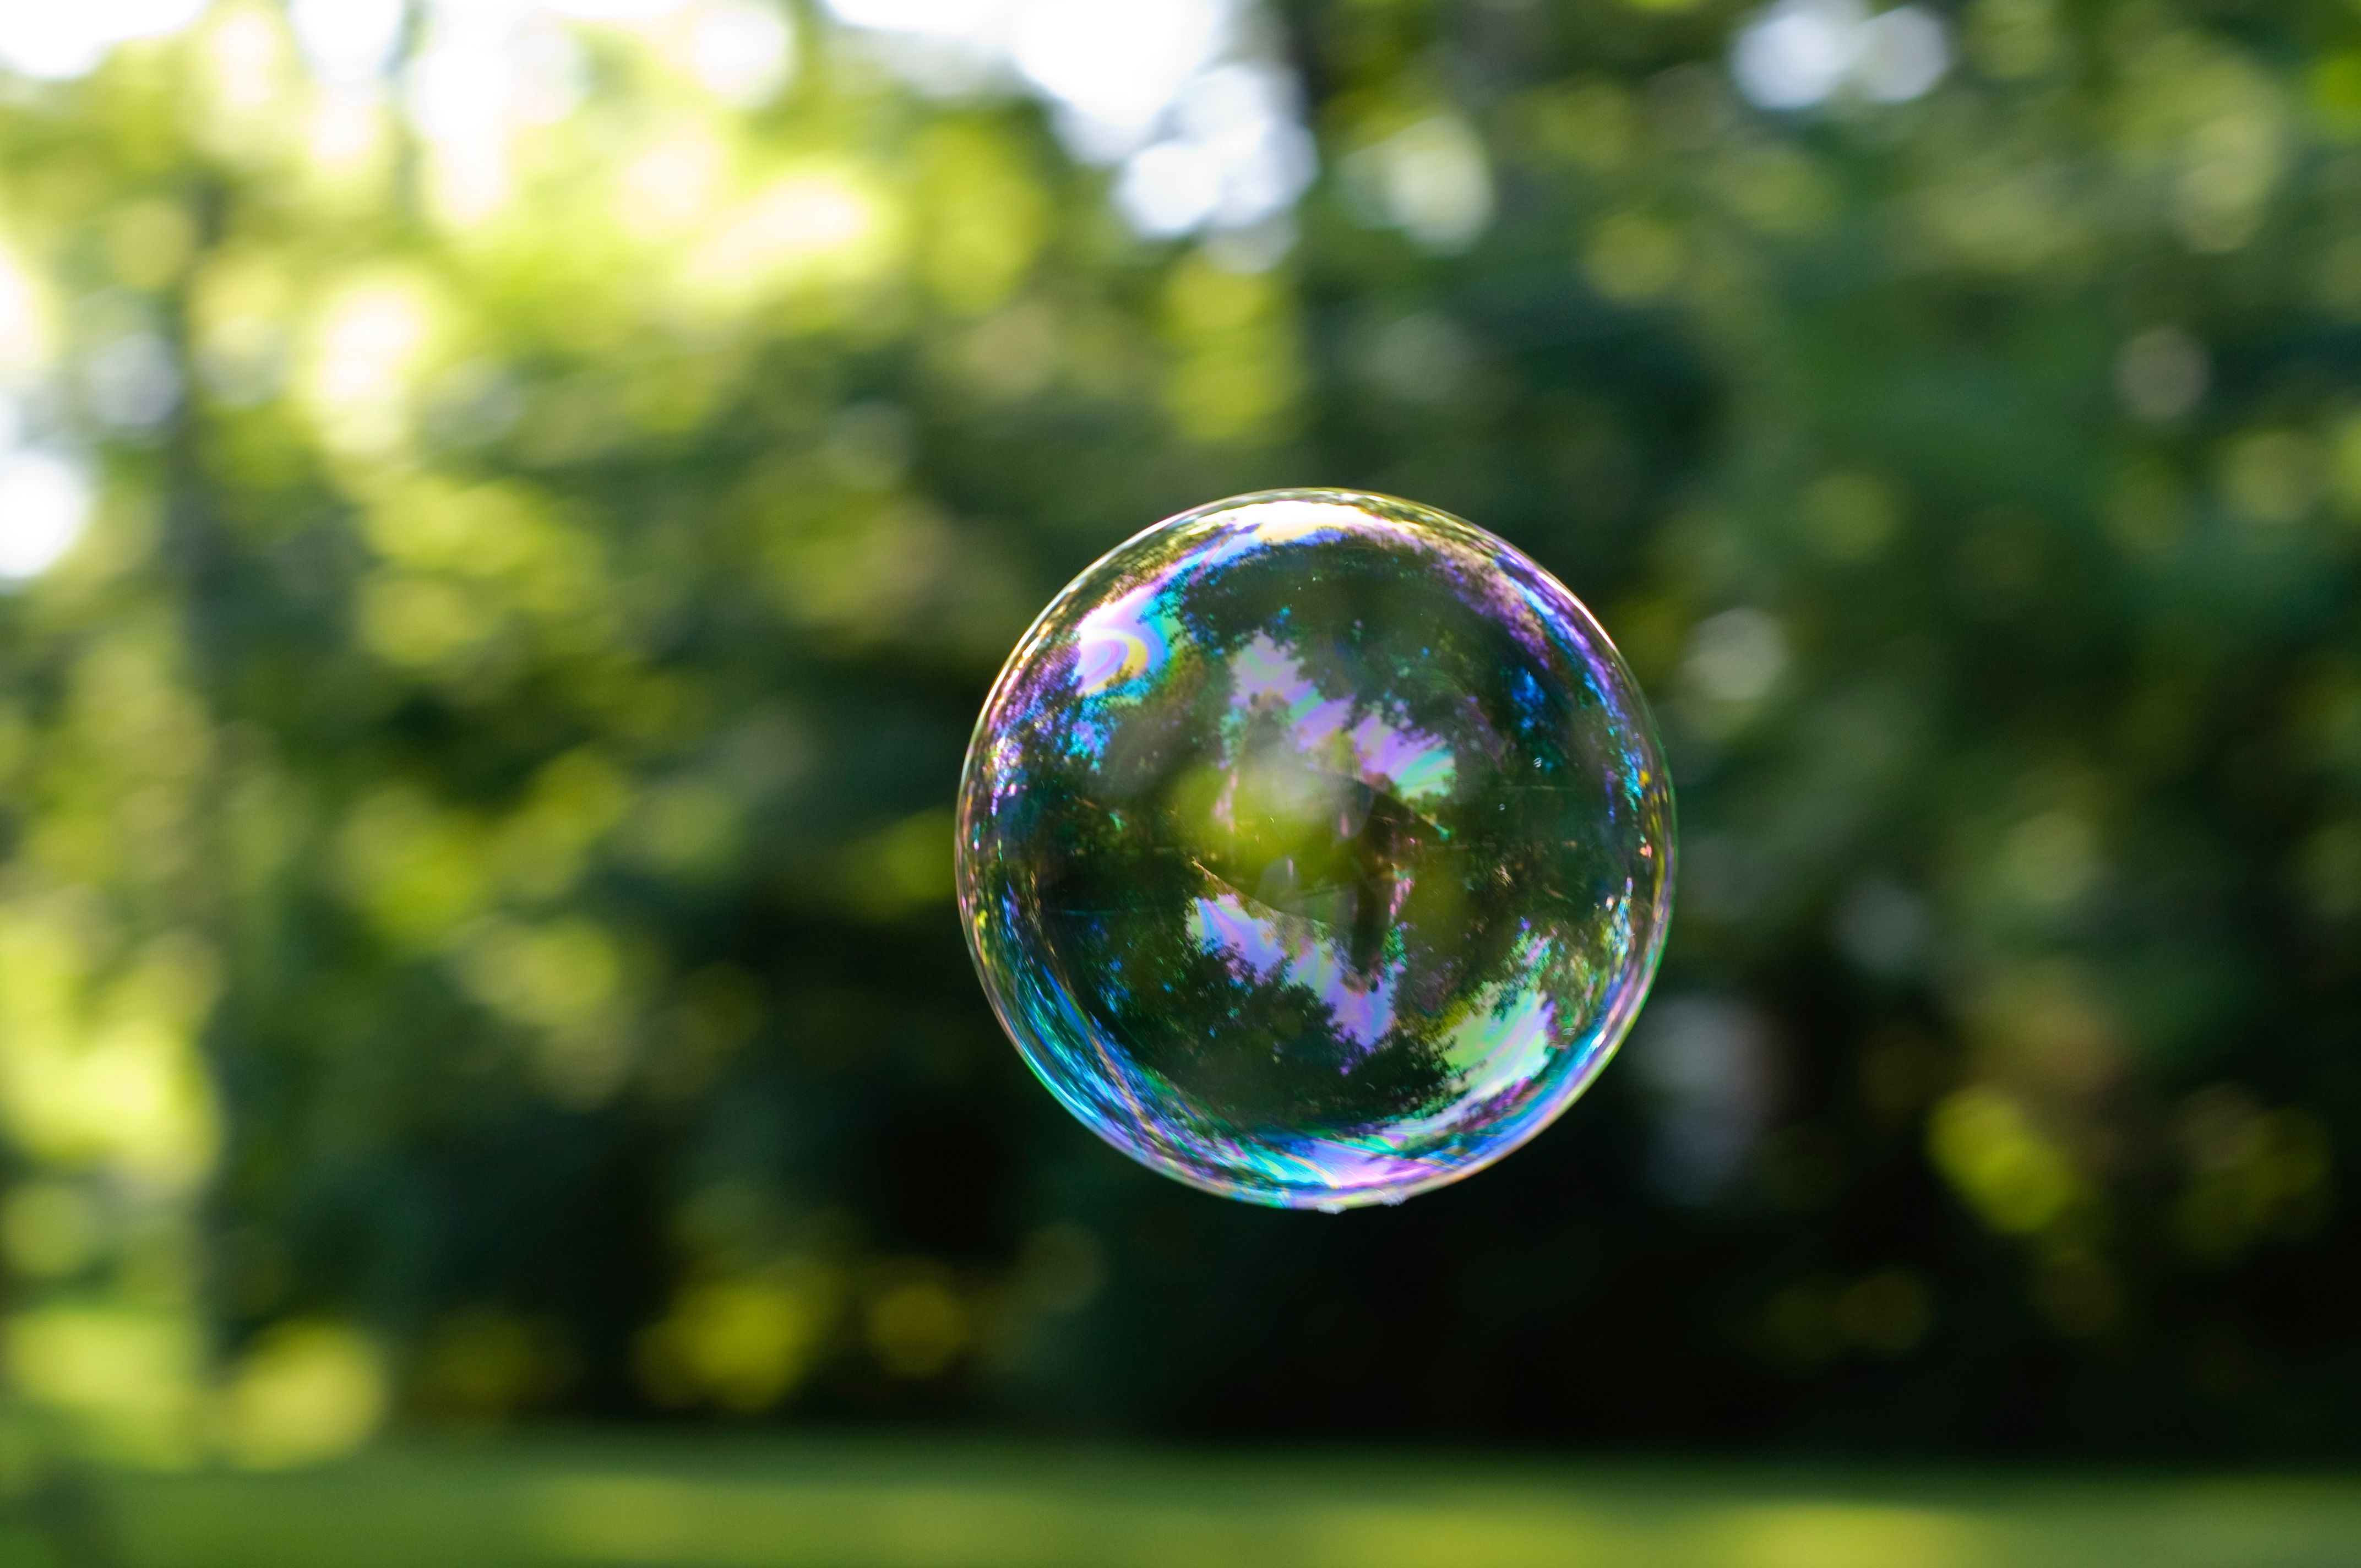 First_Time_Bubble_(4718544475).jpg